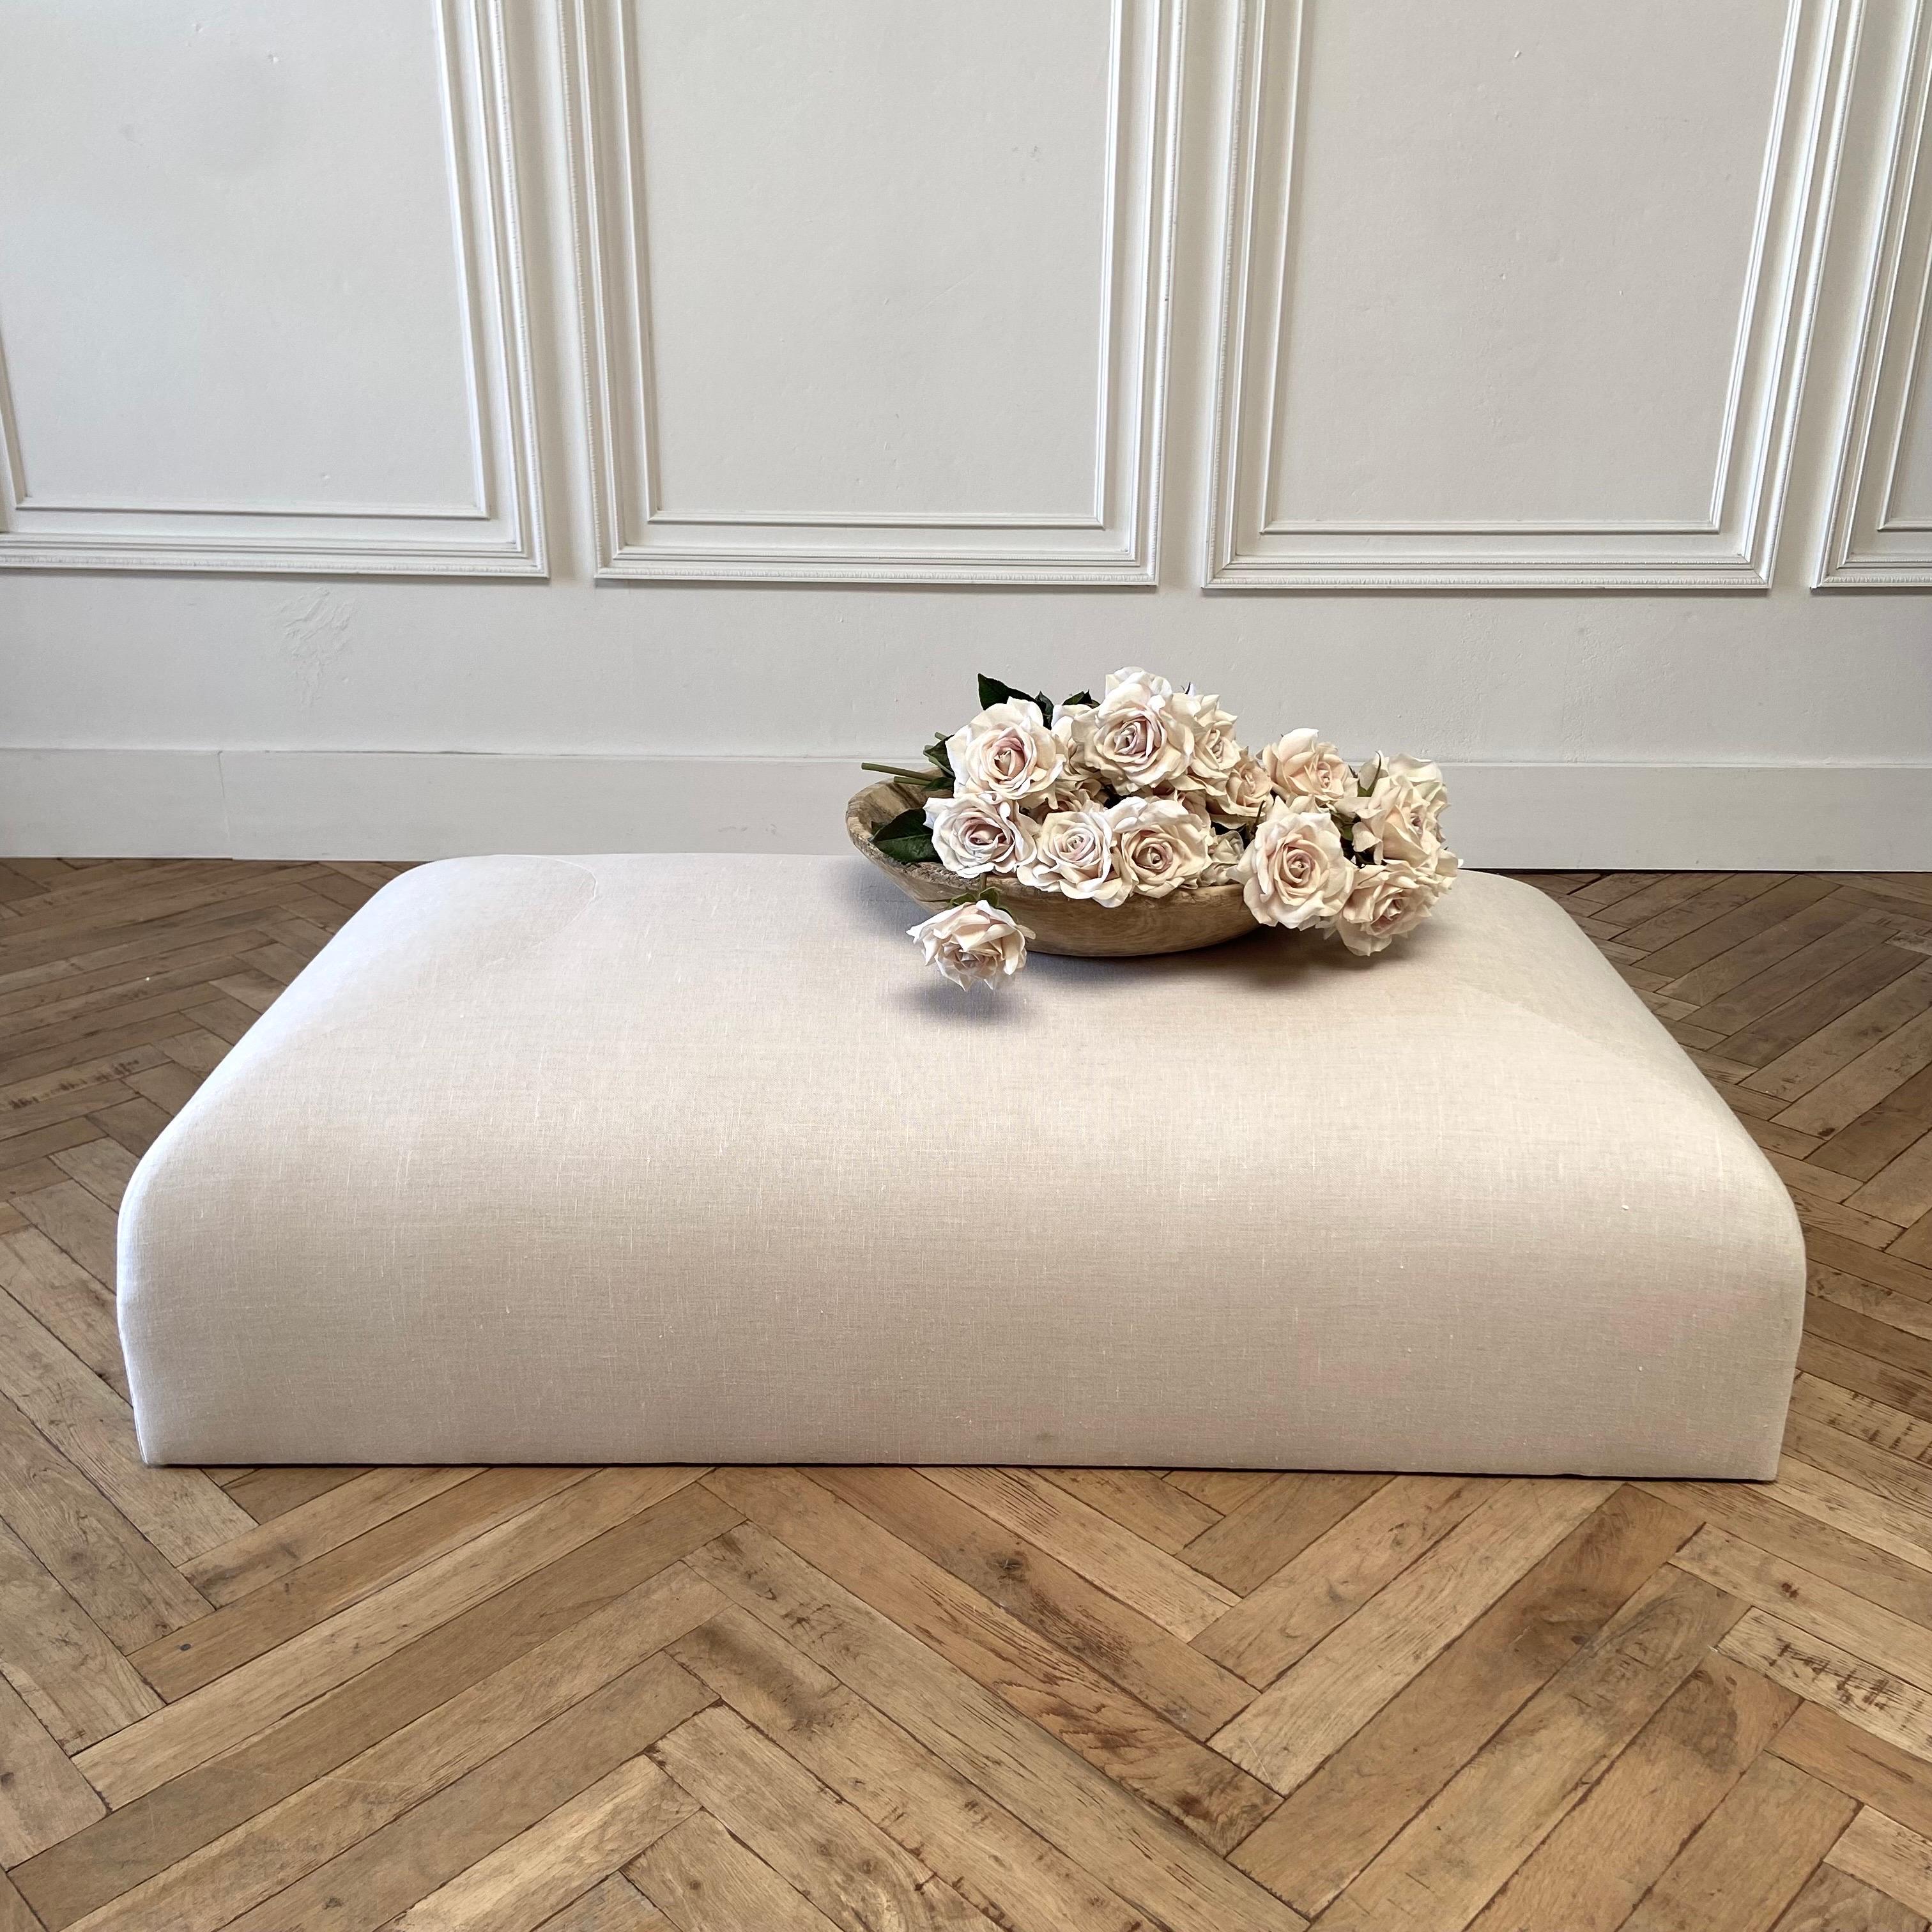 Custom Made Bean Ottoman in natural oatmeal linen.
Constructed with a 6